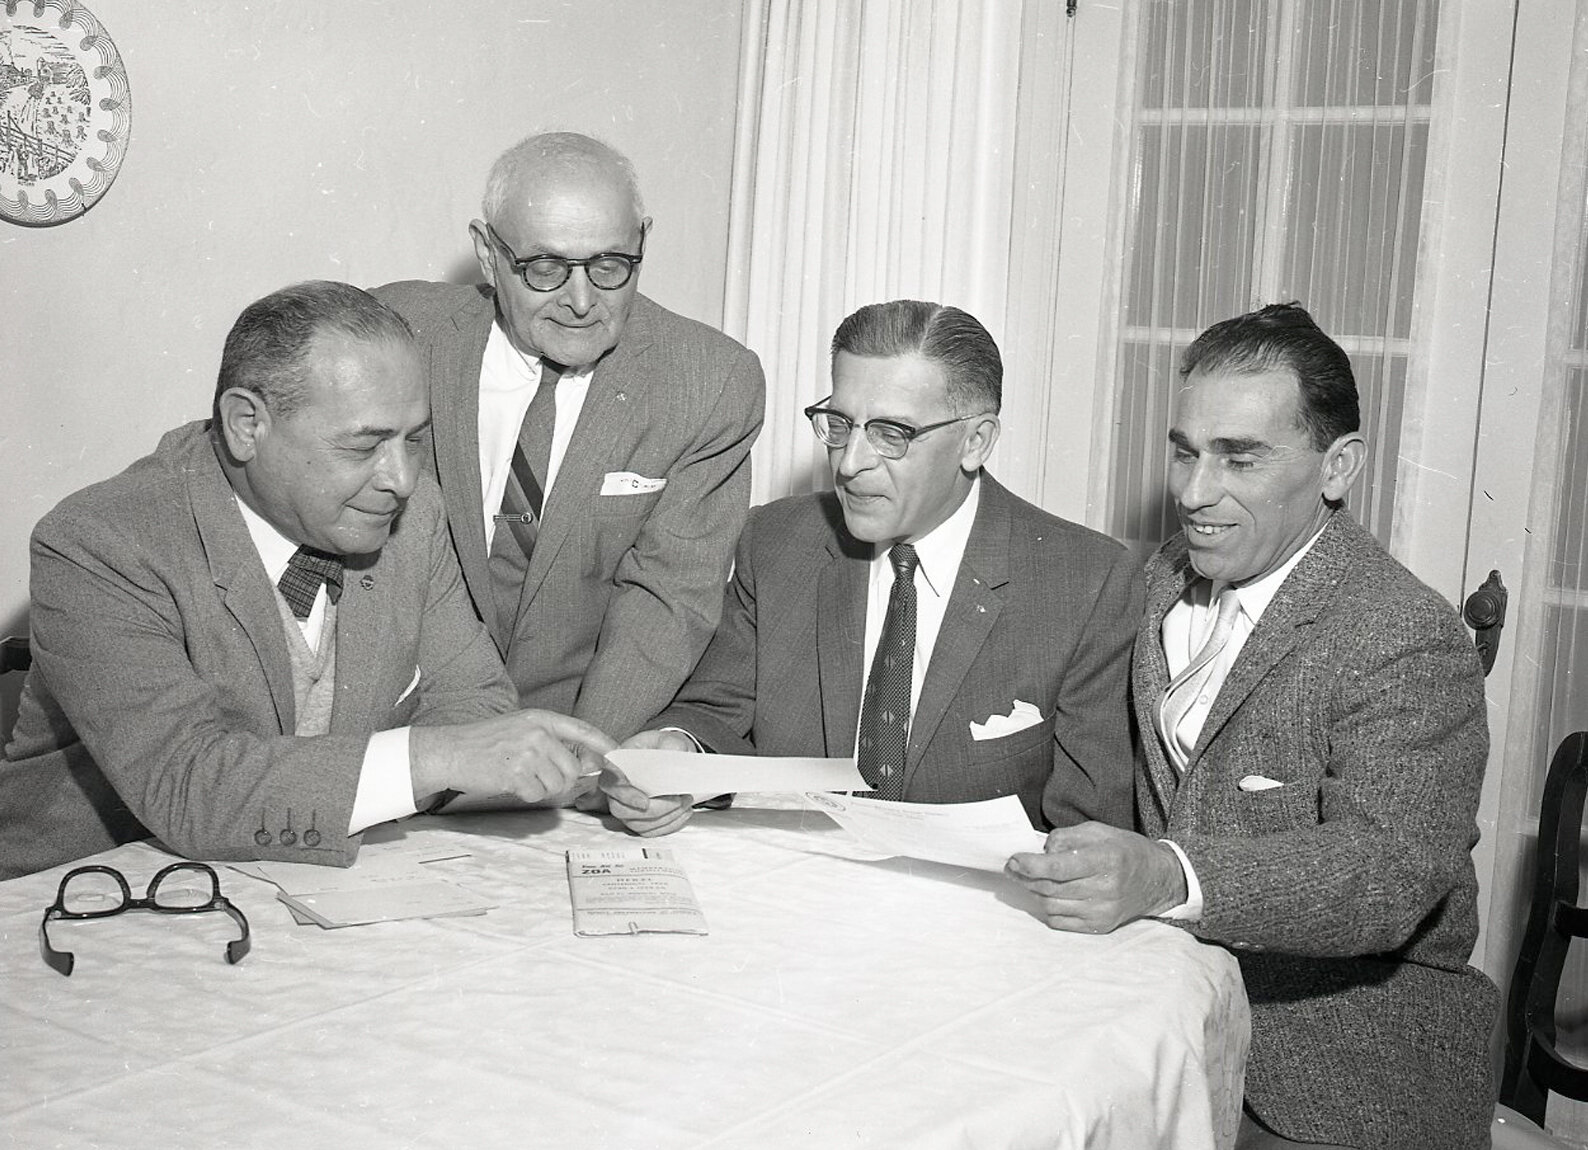 Annual Zionist Fund Dinner Committee at J.H. Cohen's House ca. 1960